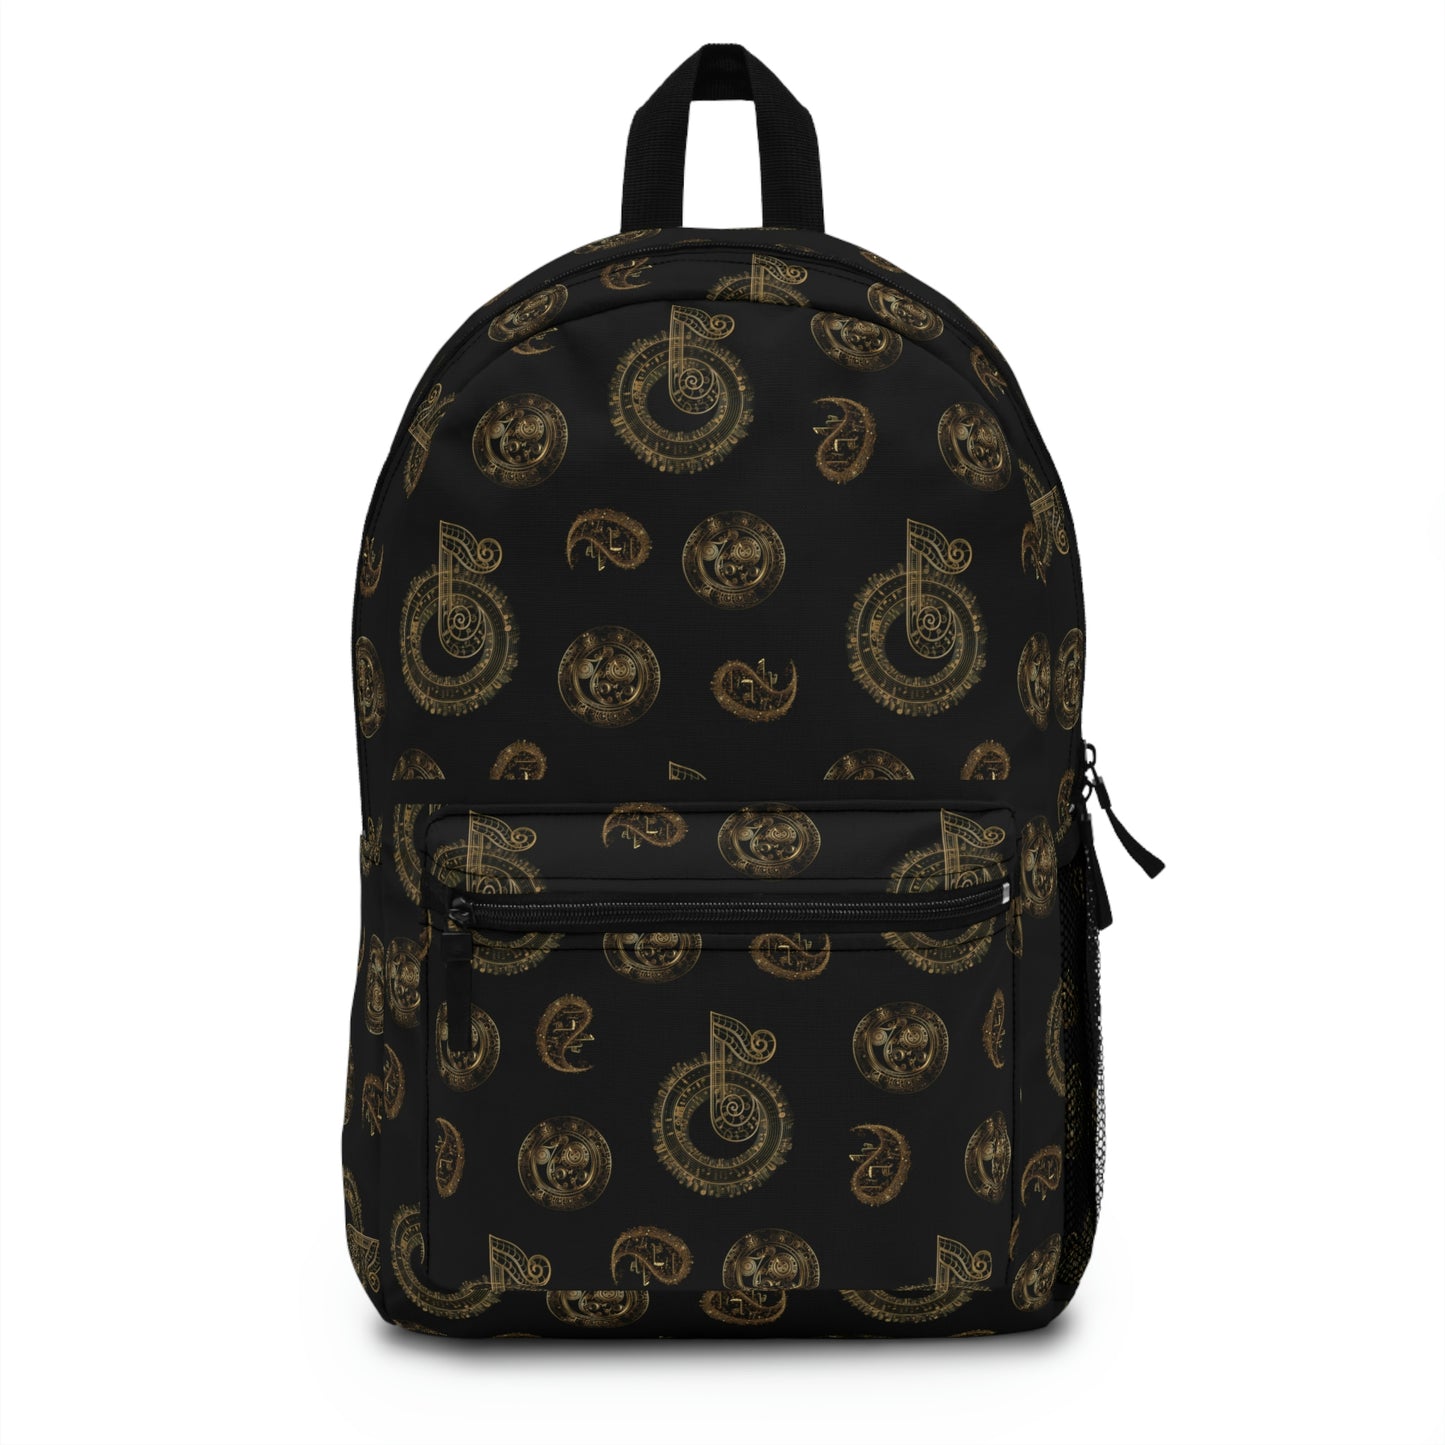 Opus Gold - Music Themed Backpack